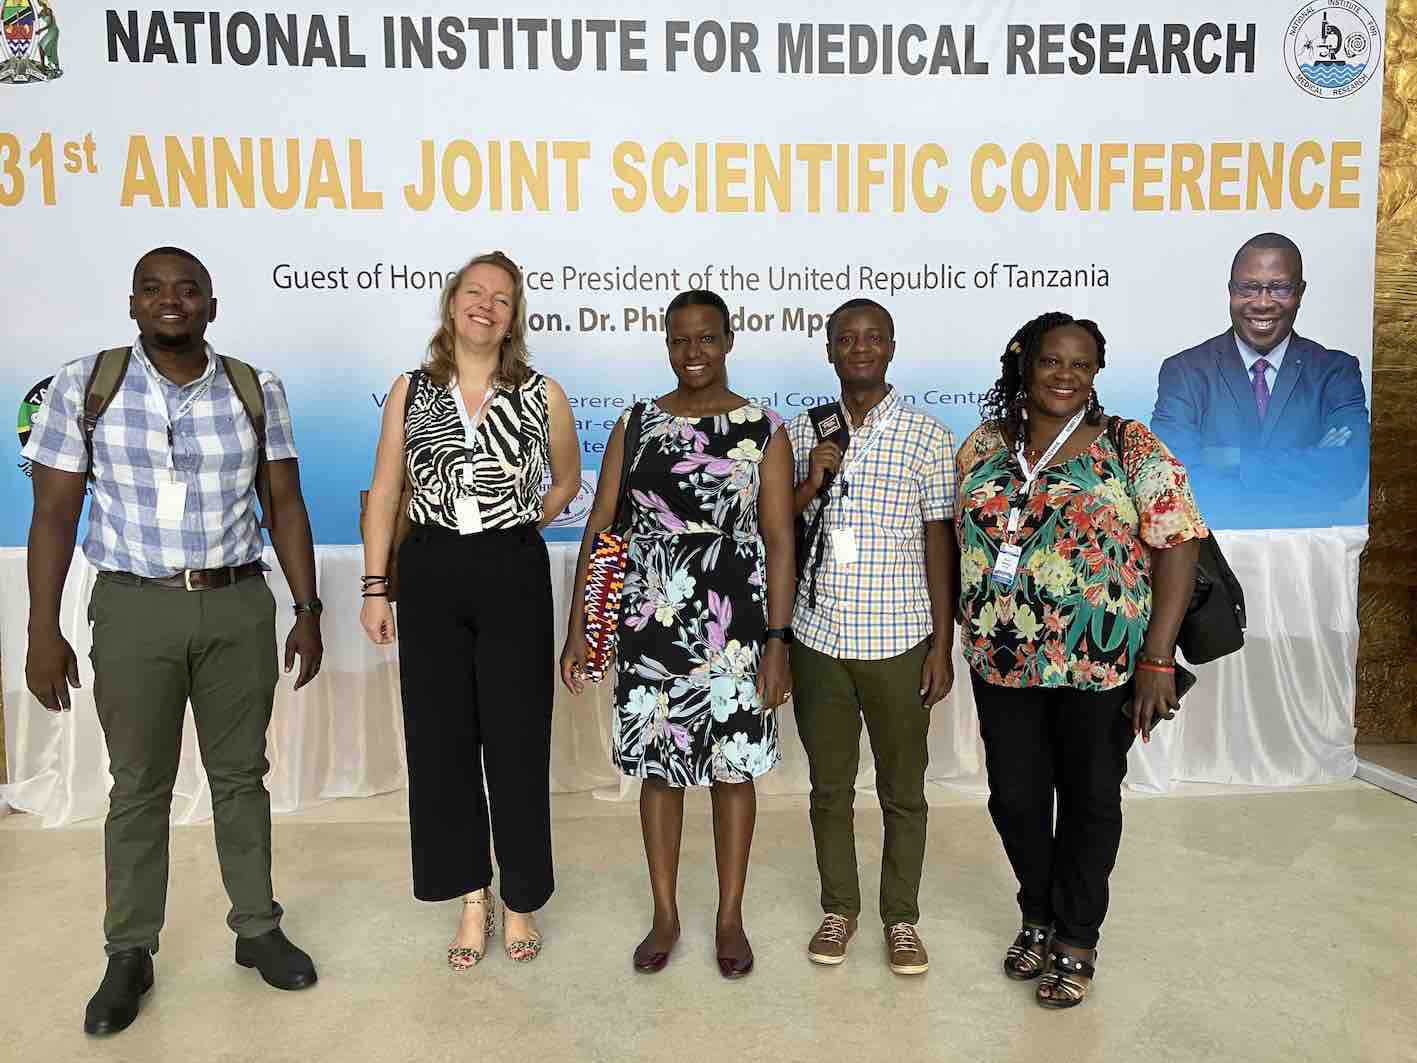 Our team attended the 31st Annual Joint Scientific Conference of the NIMR